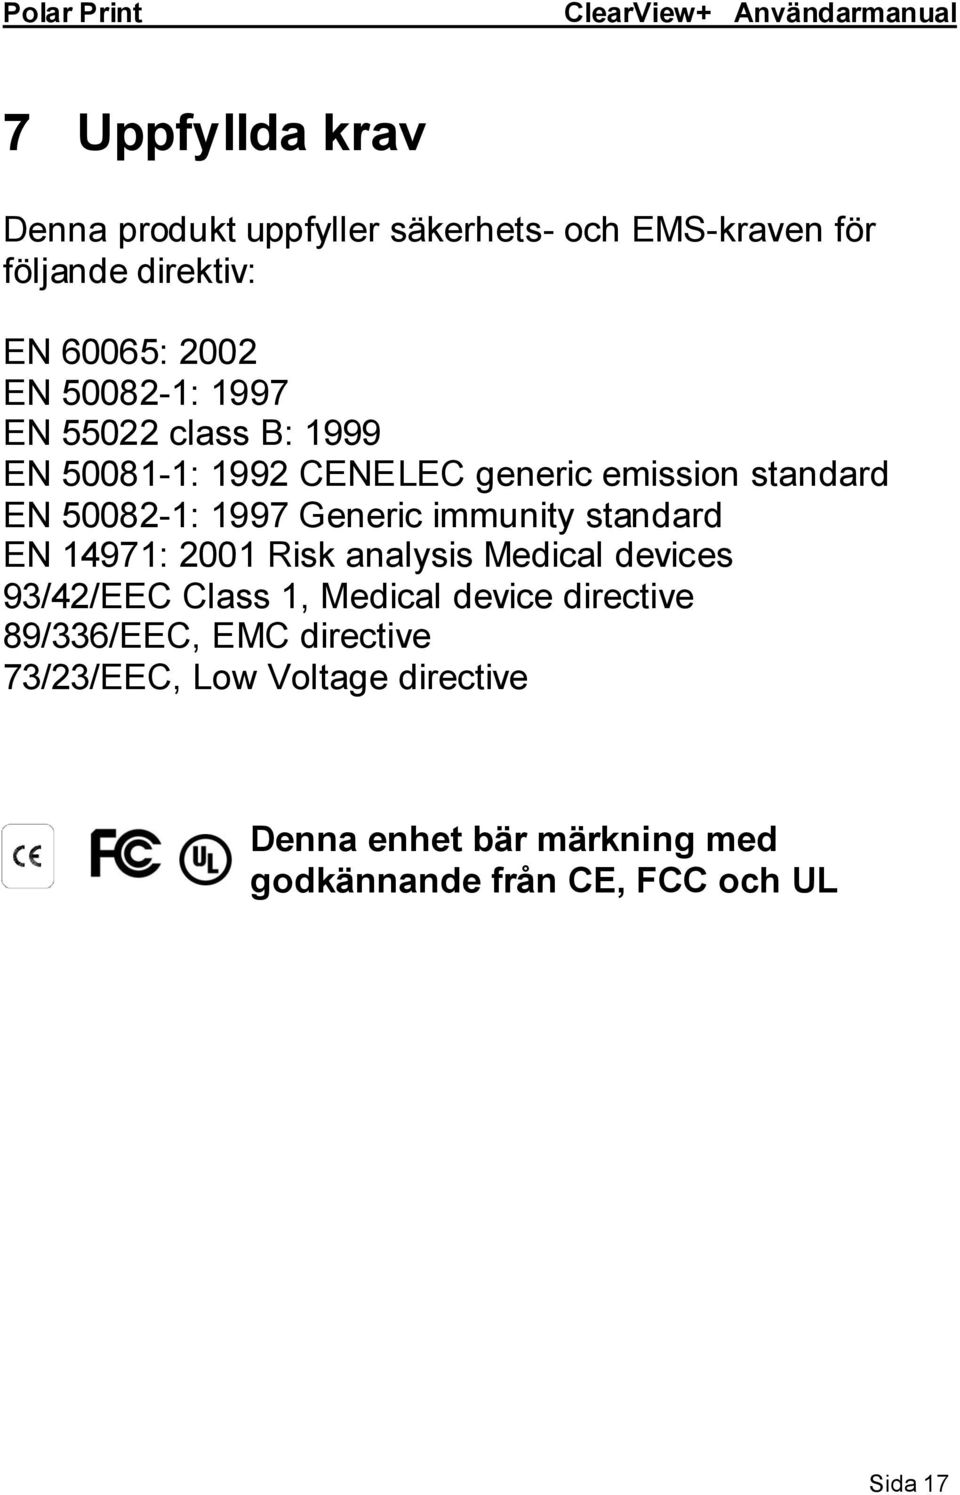 immunity standard EN 14971: 2001 Risk analysis Medical devices 93/42/EEC Class 1, Medical device directive